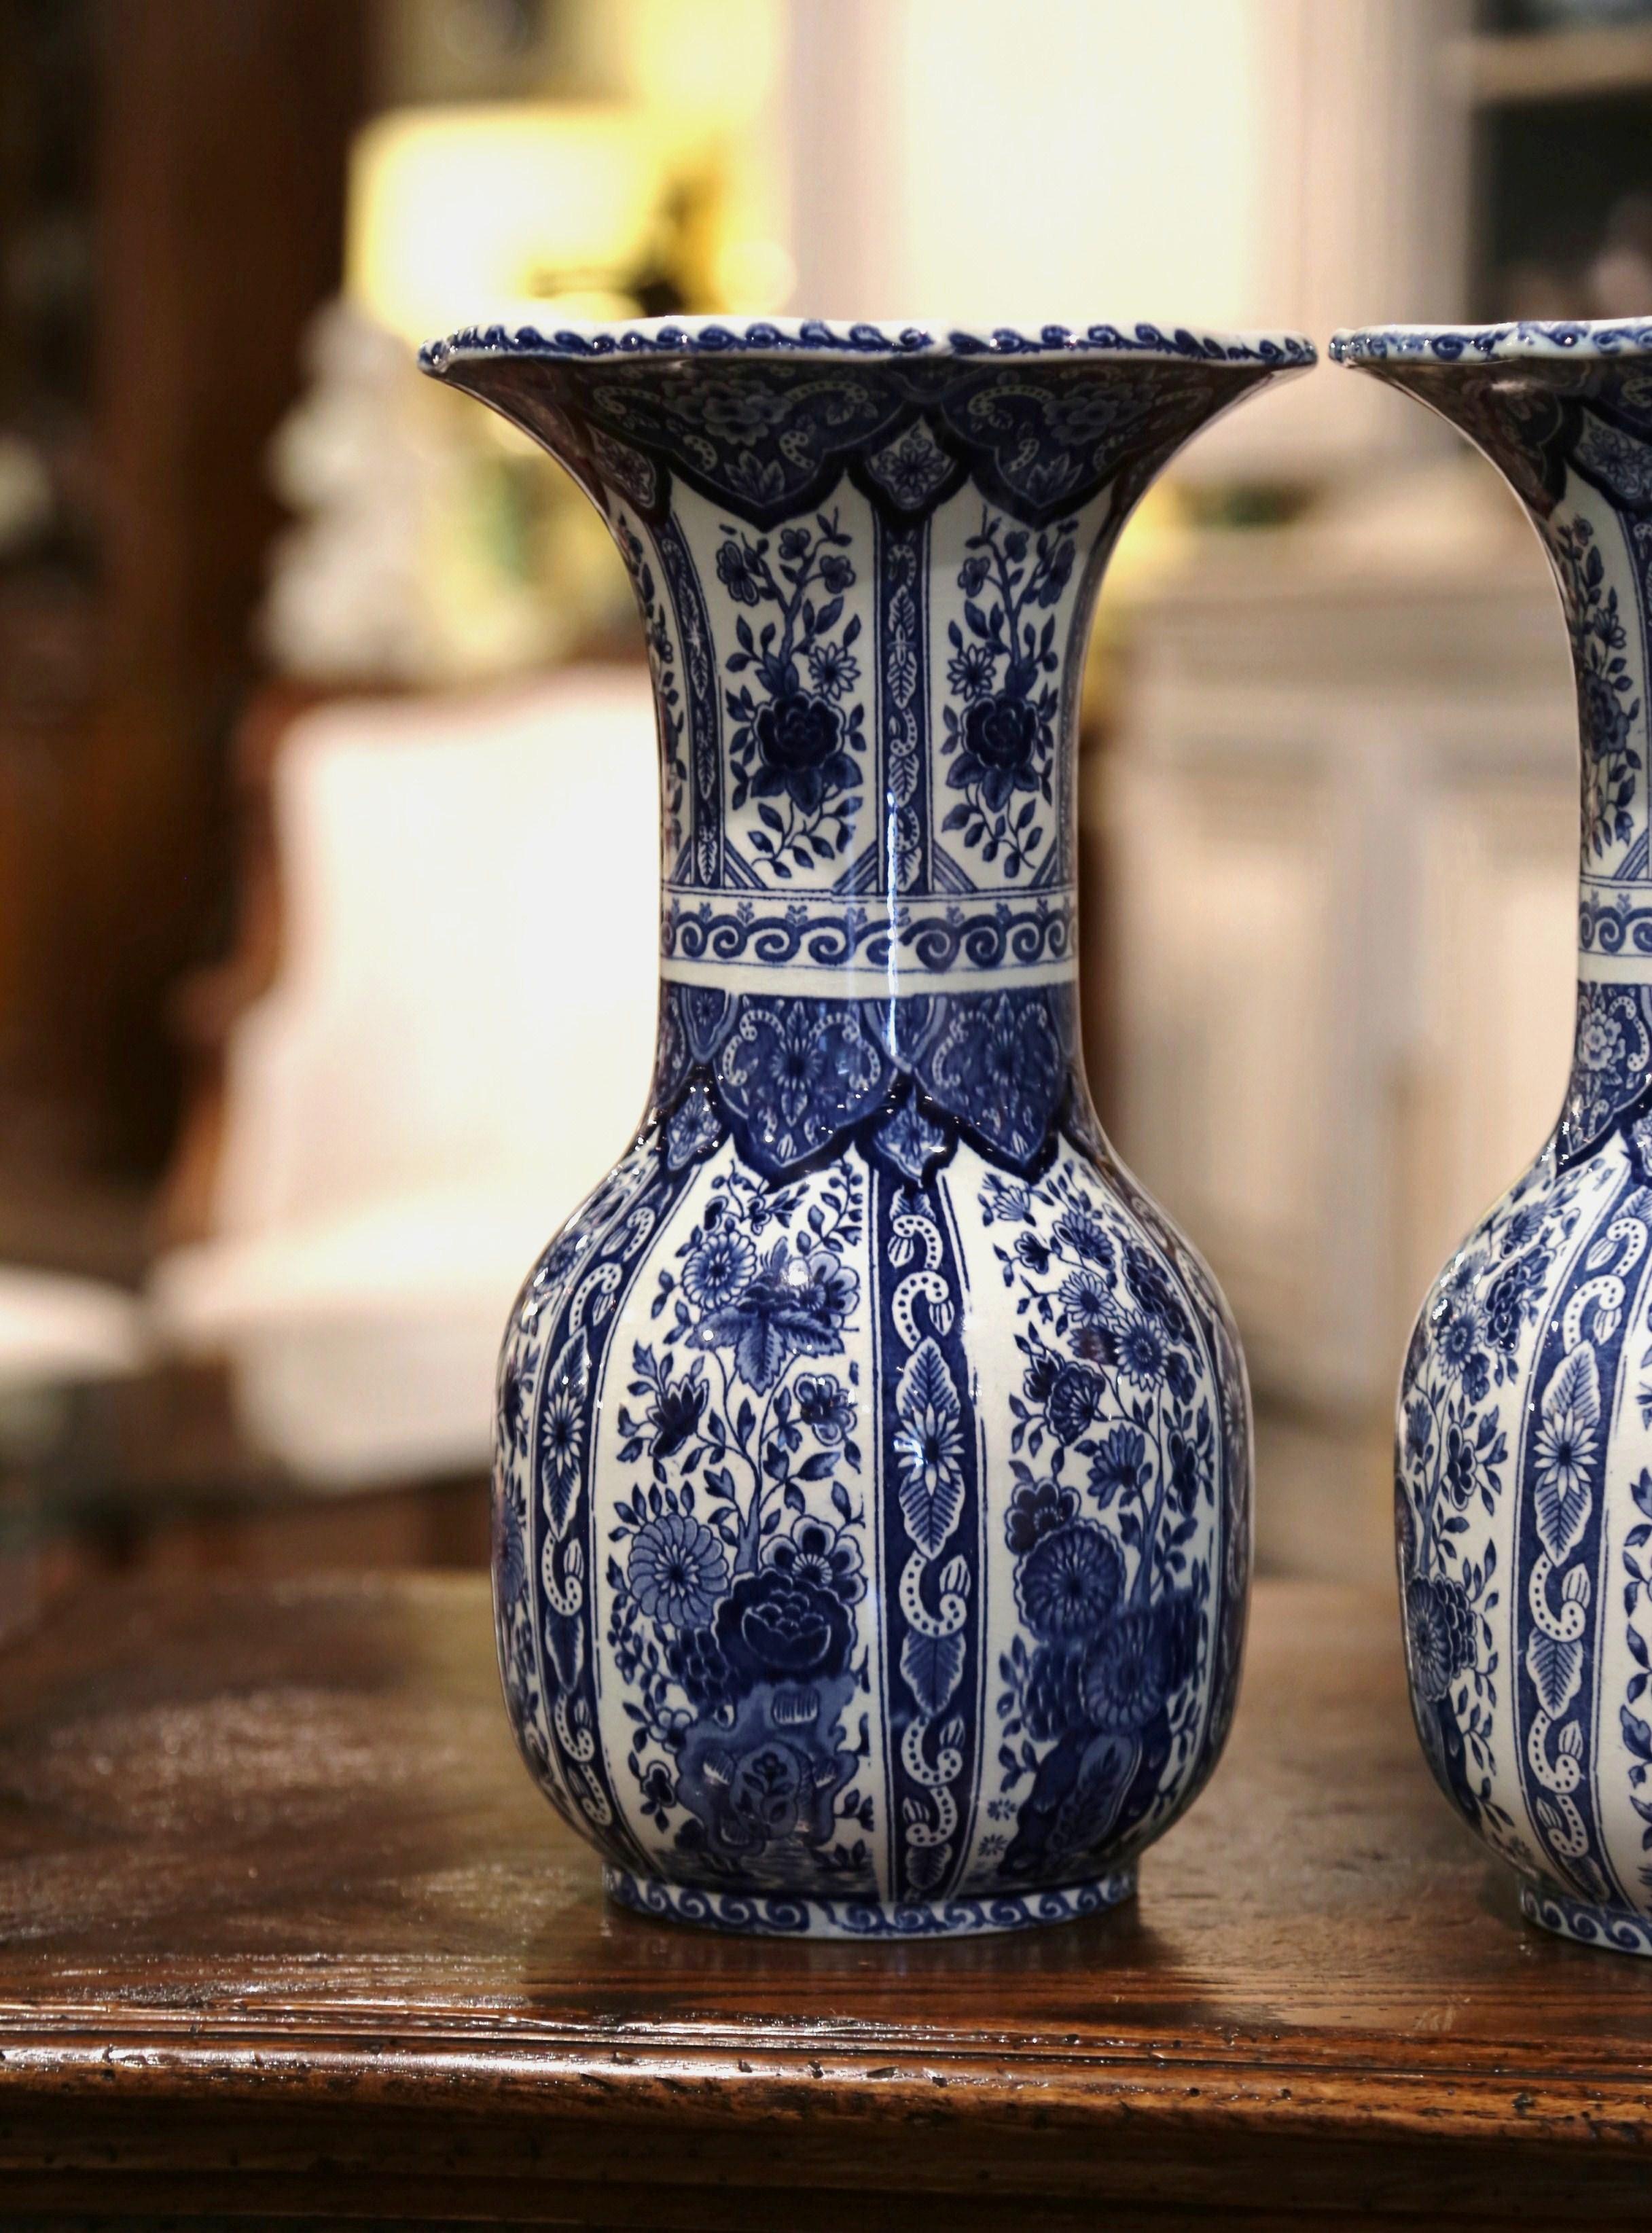 This elegant vintage pair of ceramic Delft vases was created in the Netherlands, circa 1940. Round in shape with a long neck and wide mouth, the faience flower vases feature traditional hand-painted floral decorations. They are stamped on the